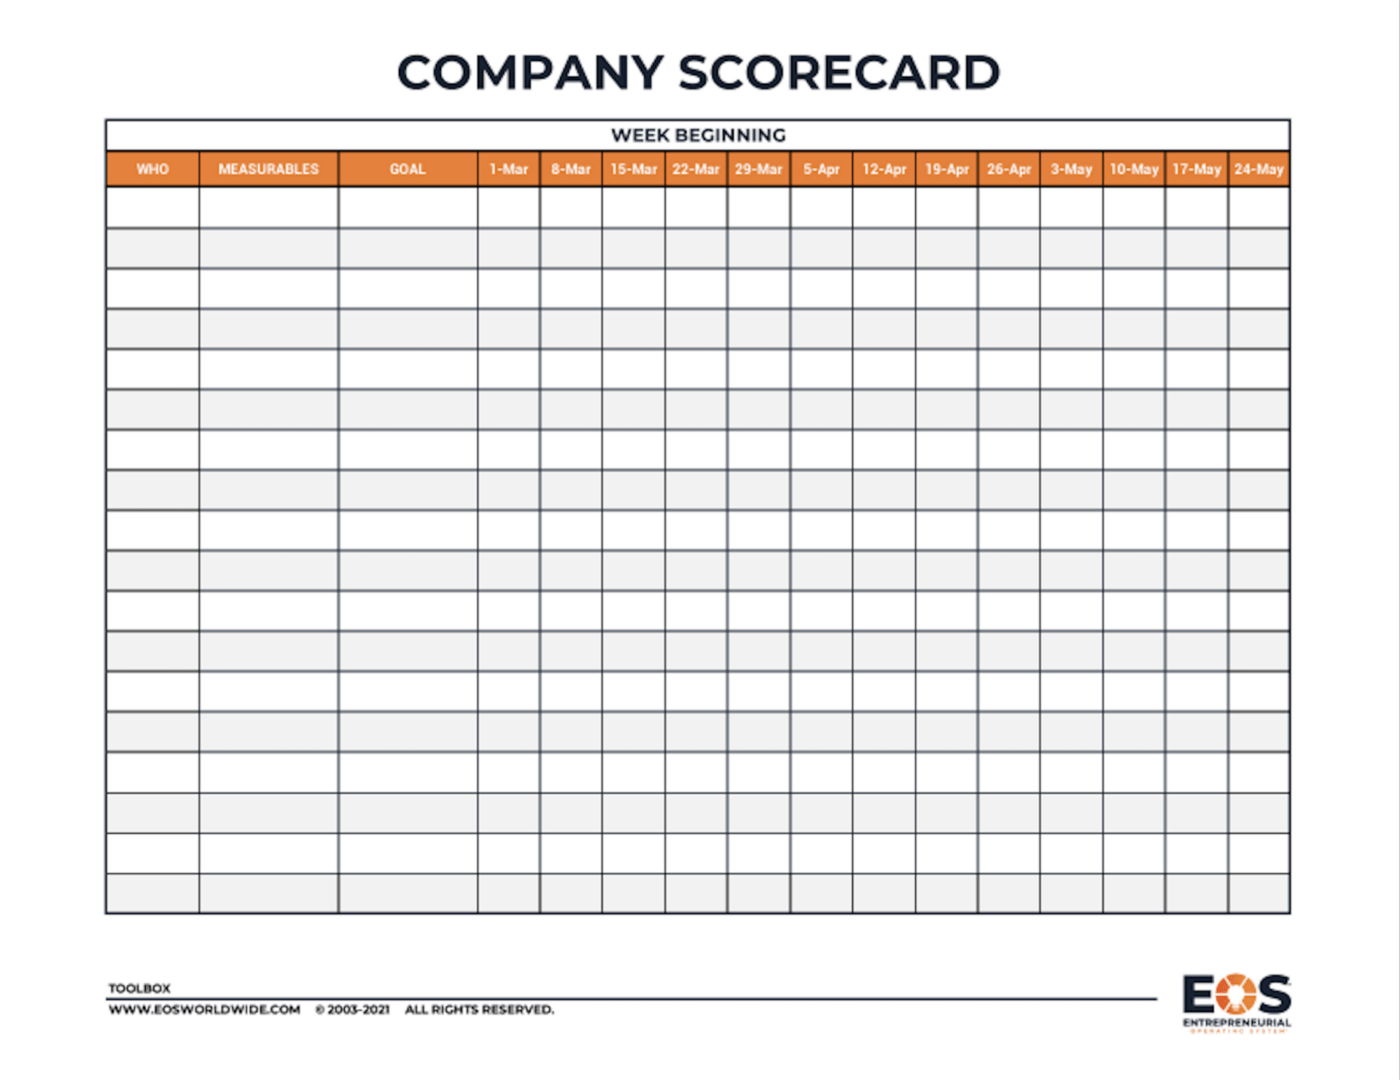 EOS Scorecard™ "Get a pulse on your business based on a handful of selected numbers and make decisions based on facts instead of subjective opinions and egos using the Scorecard."